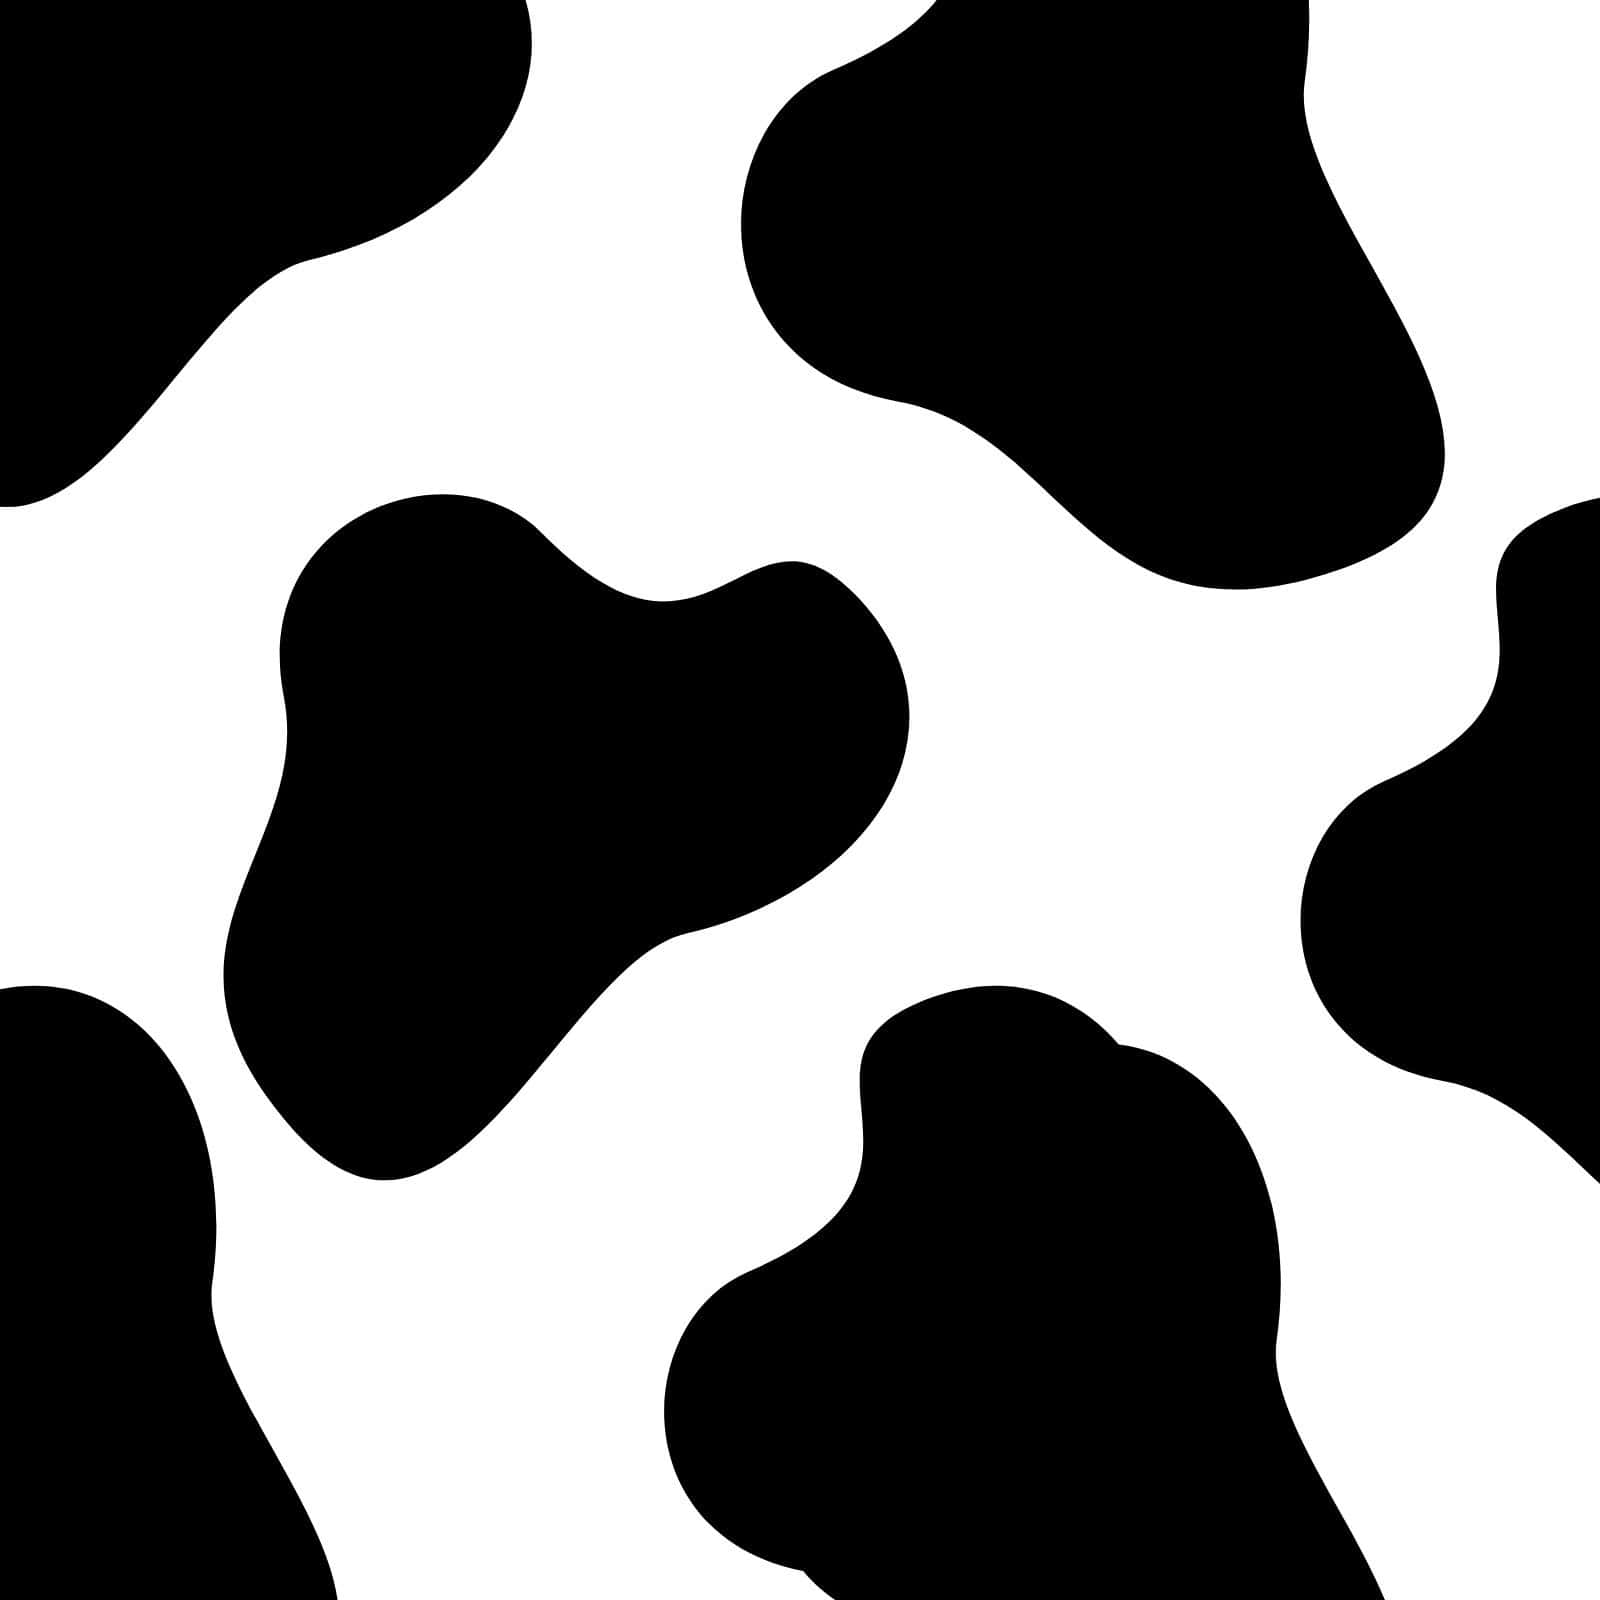 A Dairy Dream - A Black and White Cow